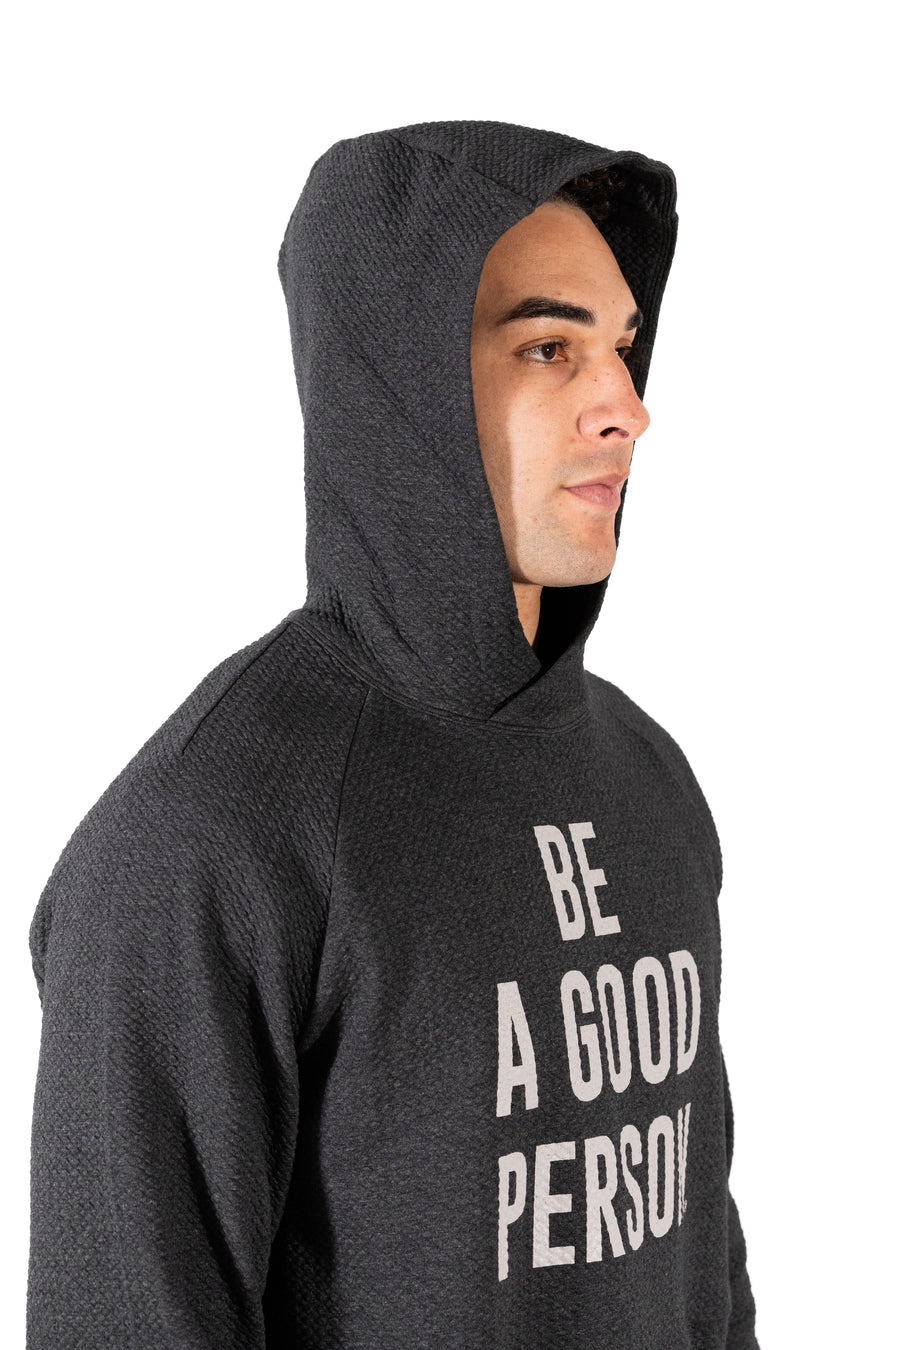 At Ease Textured Double Knit Hoodie - Heathered Black/Black - lululemon // BE A GOOD PERSON